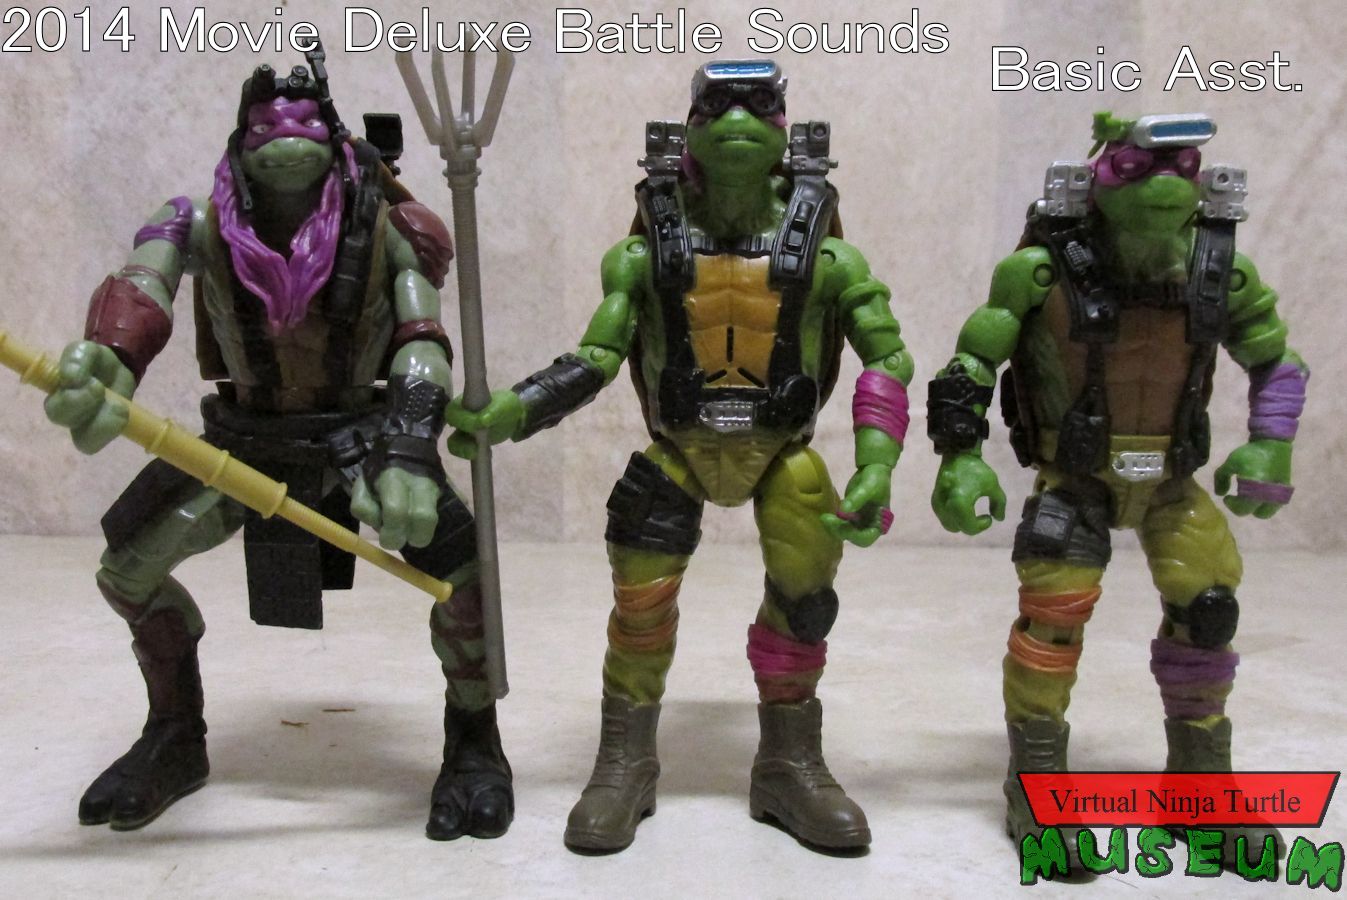 Battle Sounds, basic assortment and 2014 movie deluxe Donatellos